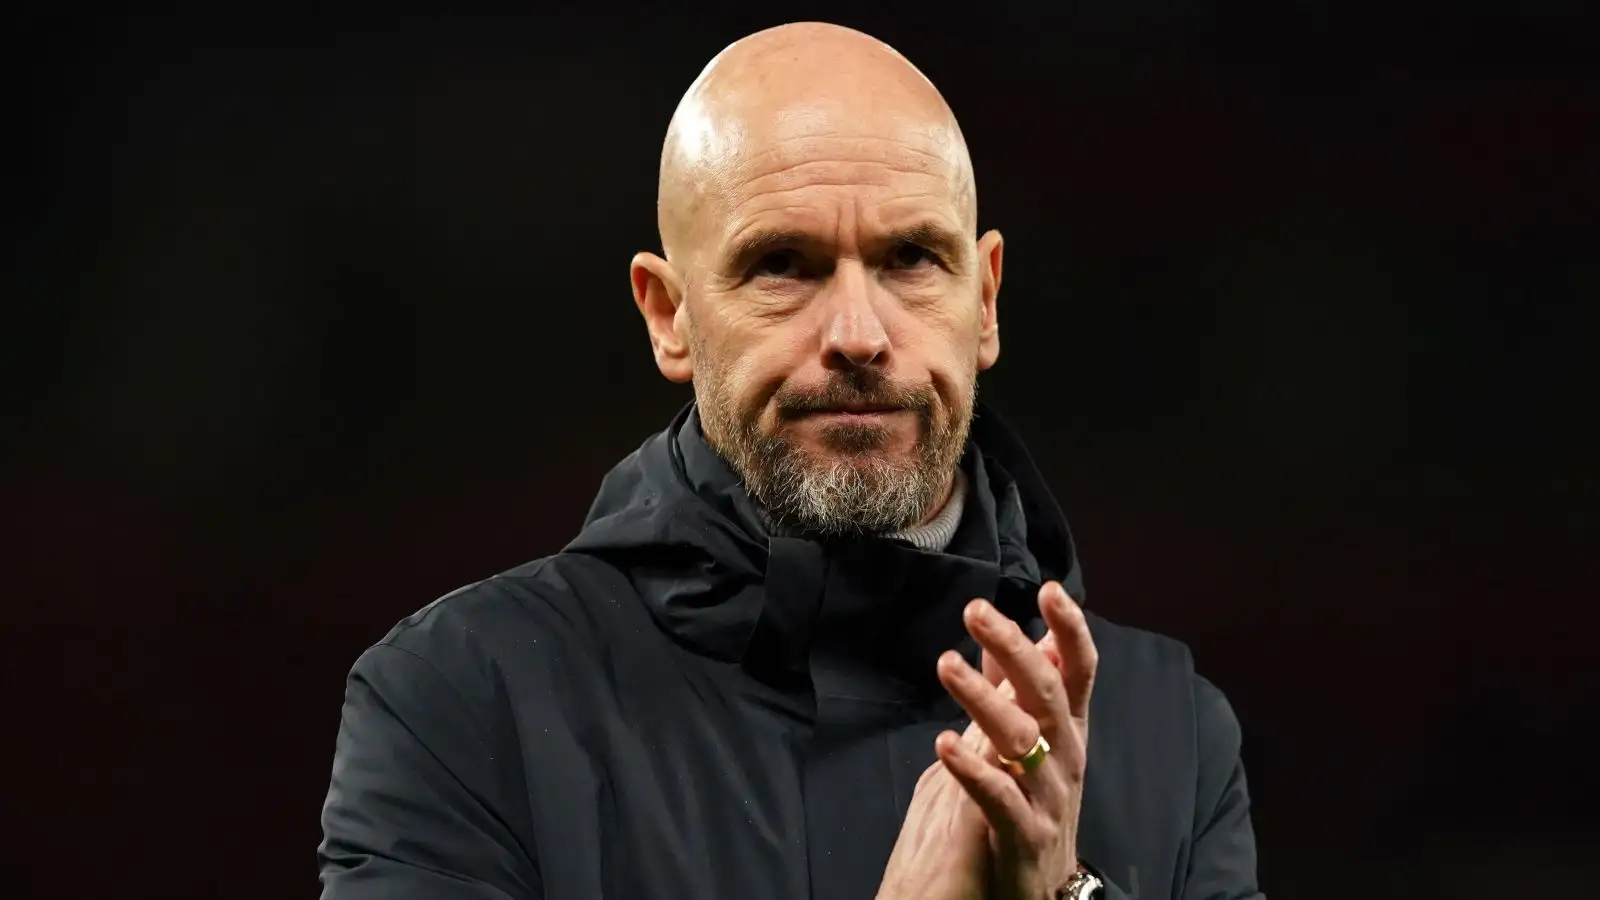 'I will talk with my team' - Ten Hag refuses to discuss Man Utd concerns after Newcastle loss